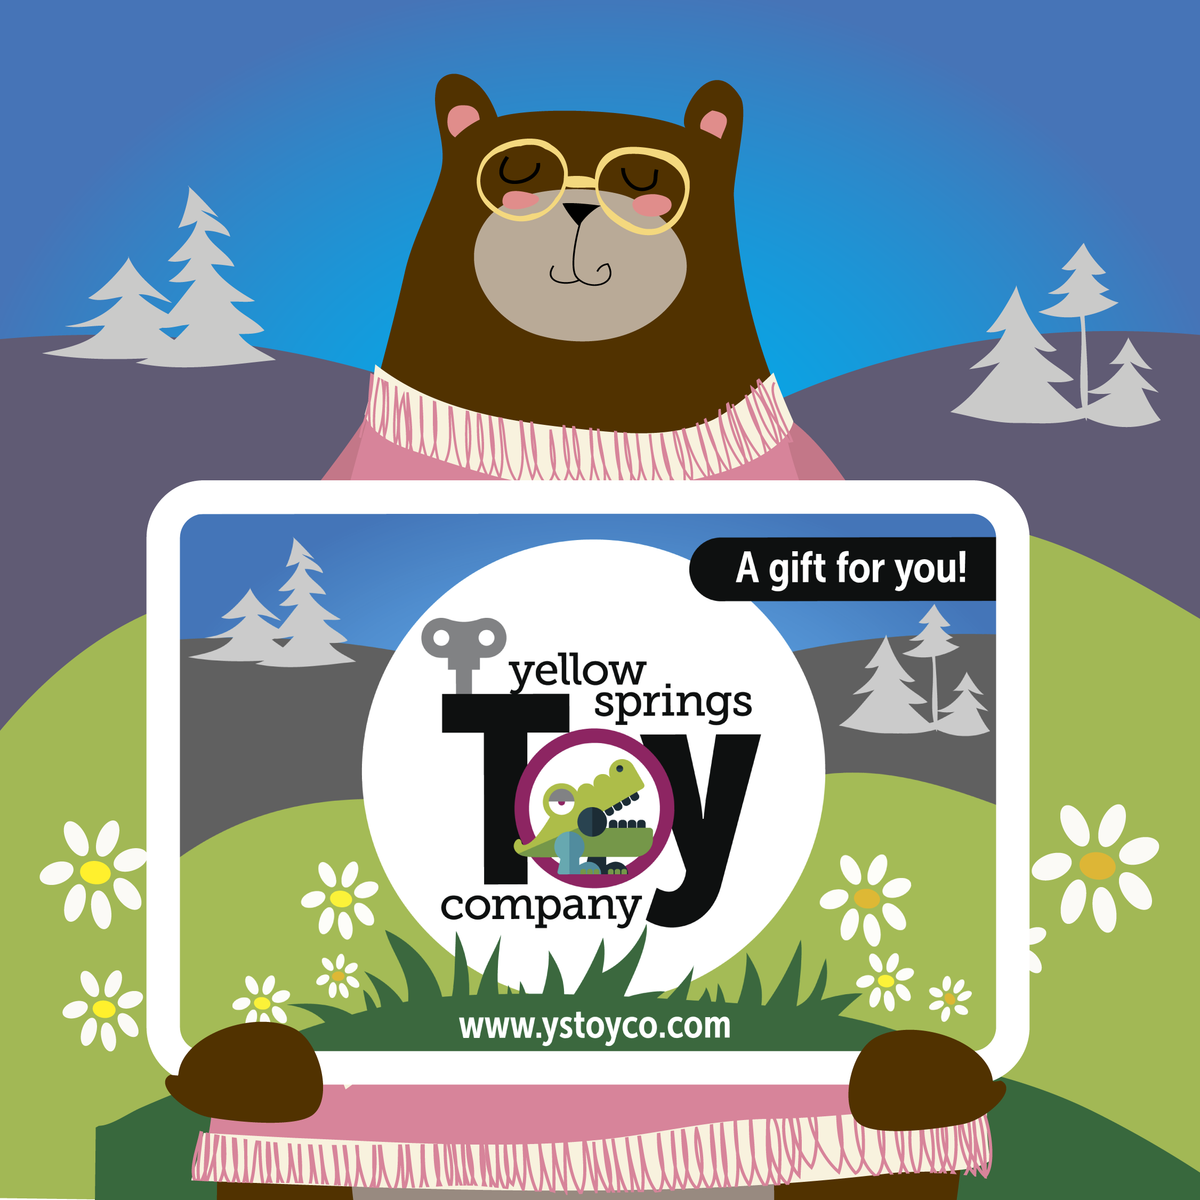 An illustration of a brown bear with glasses holding a Yellow Springs Toy Company Gift Card